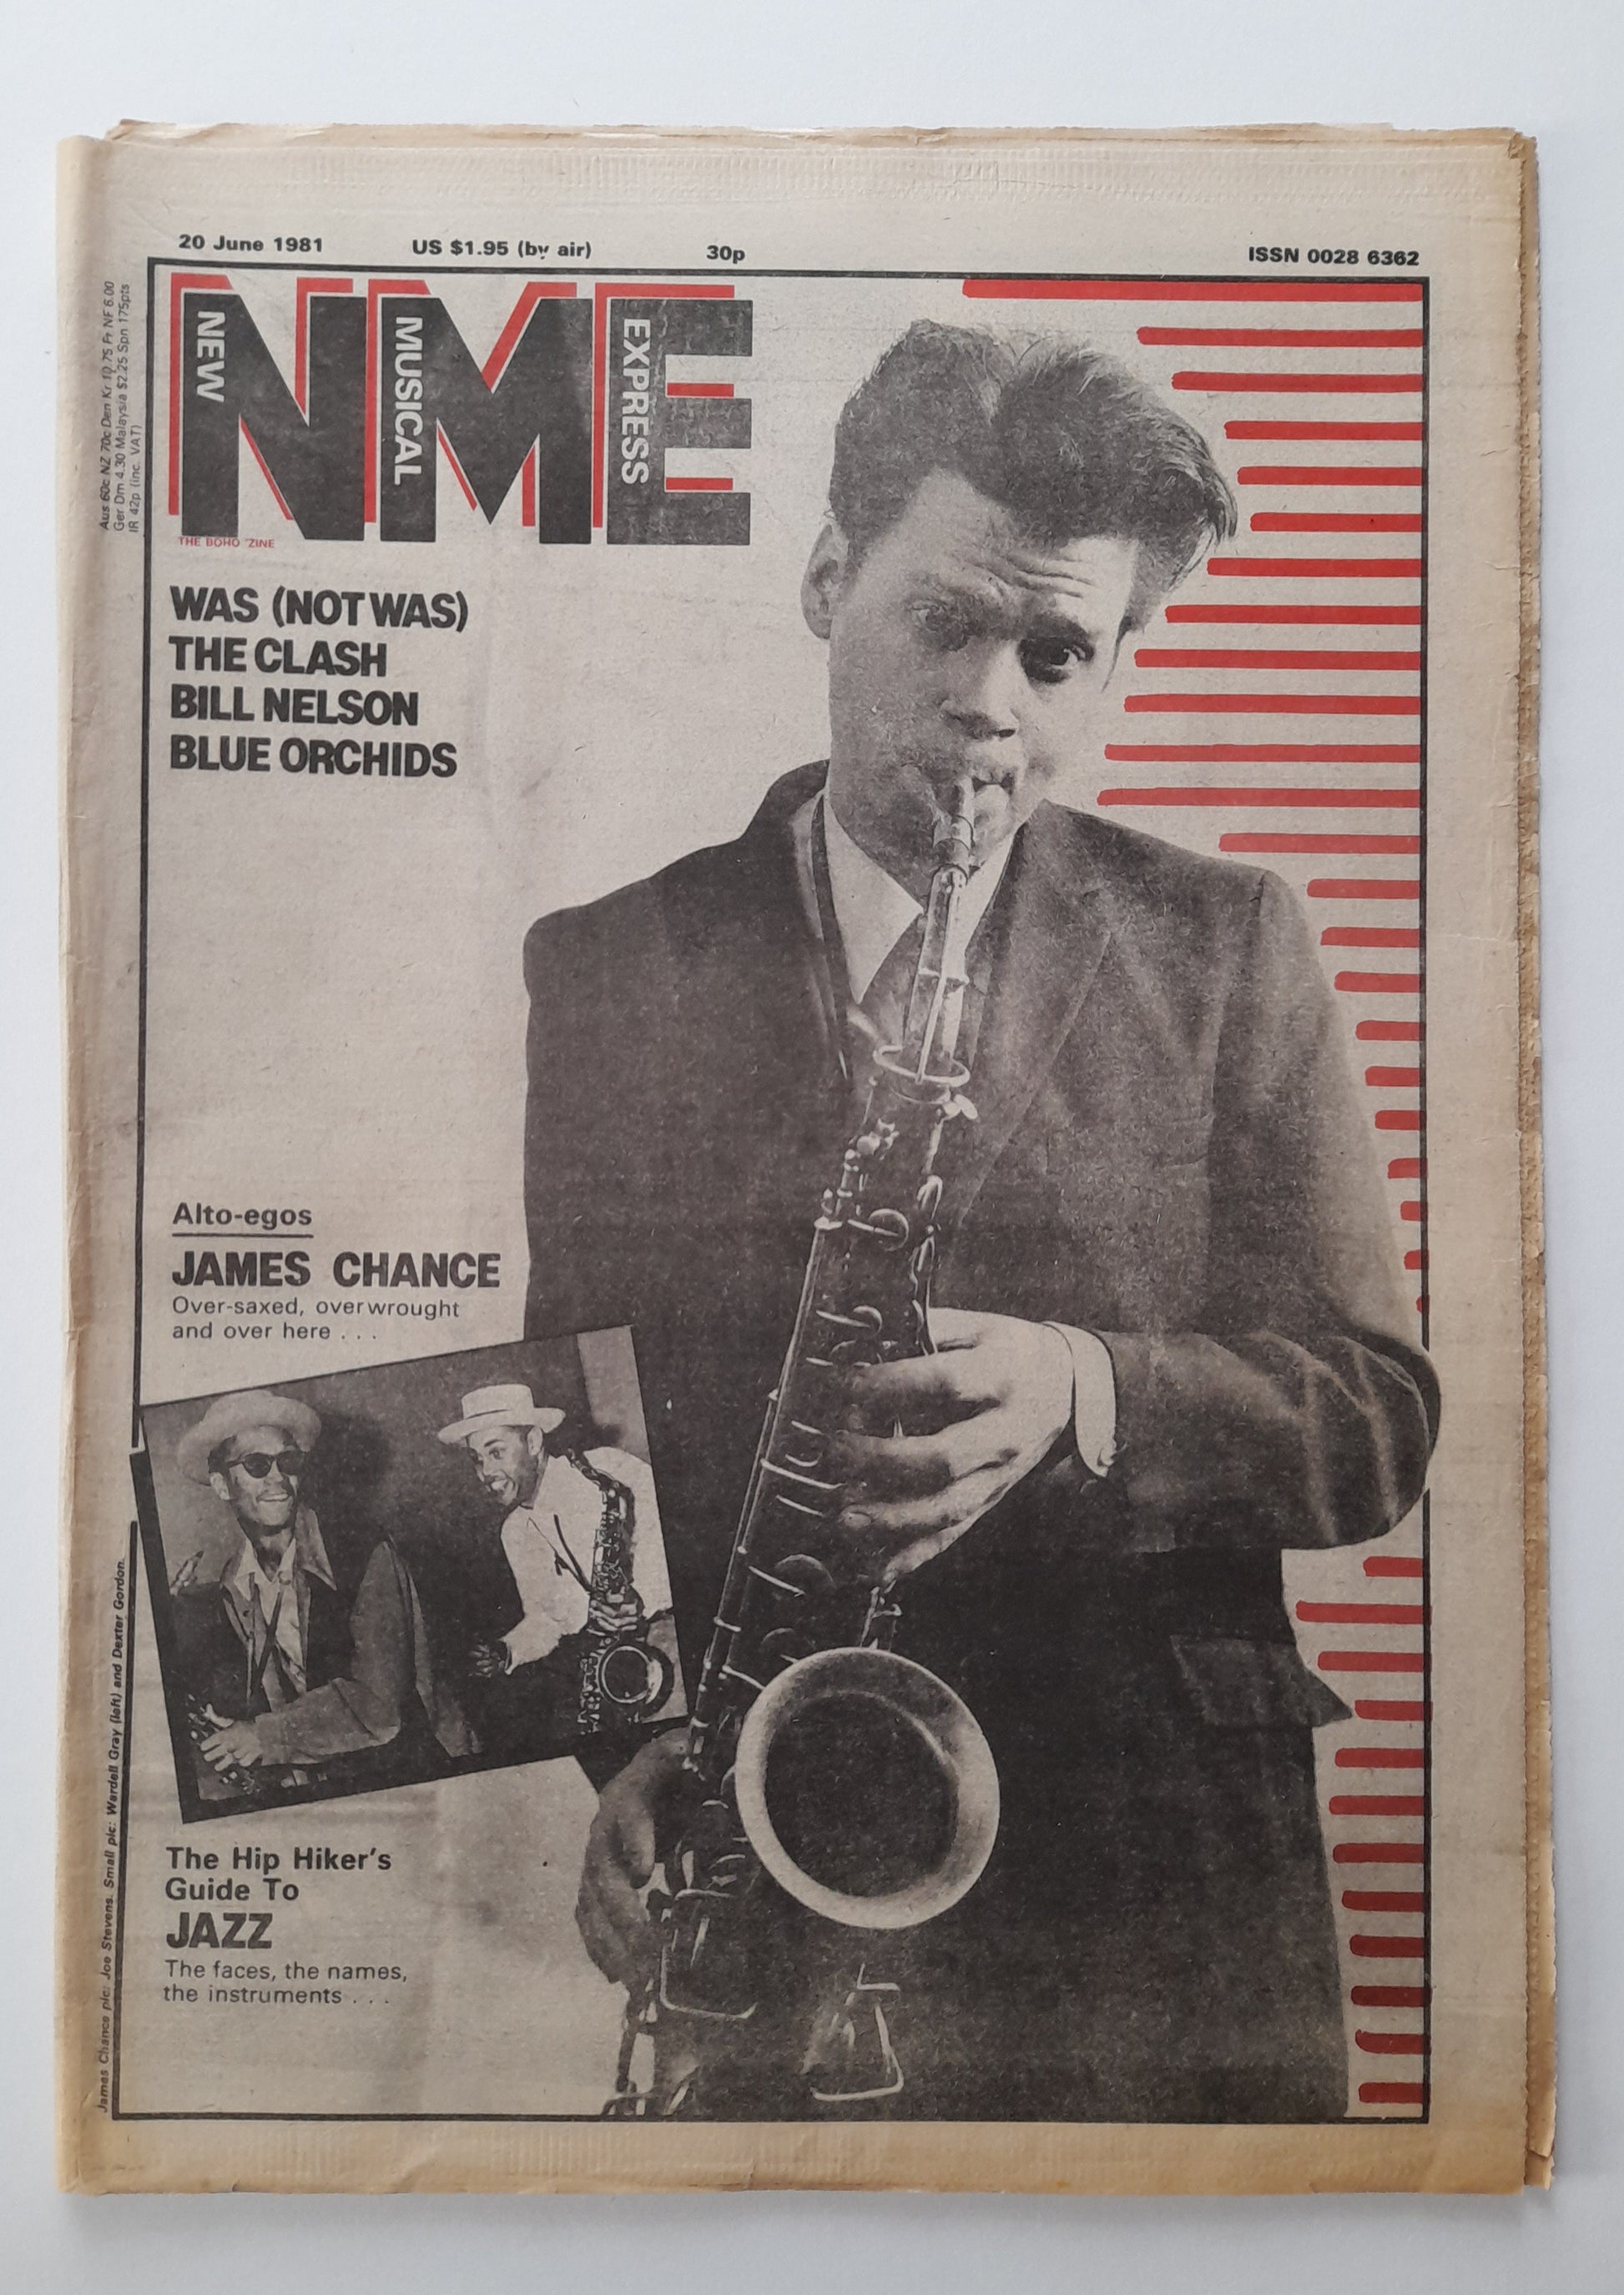 NME Magazine 20 June 1981 James Chance, Was (Not Was), The Clash, Bill Nelson